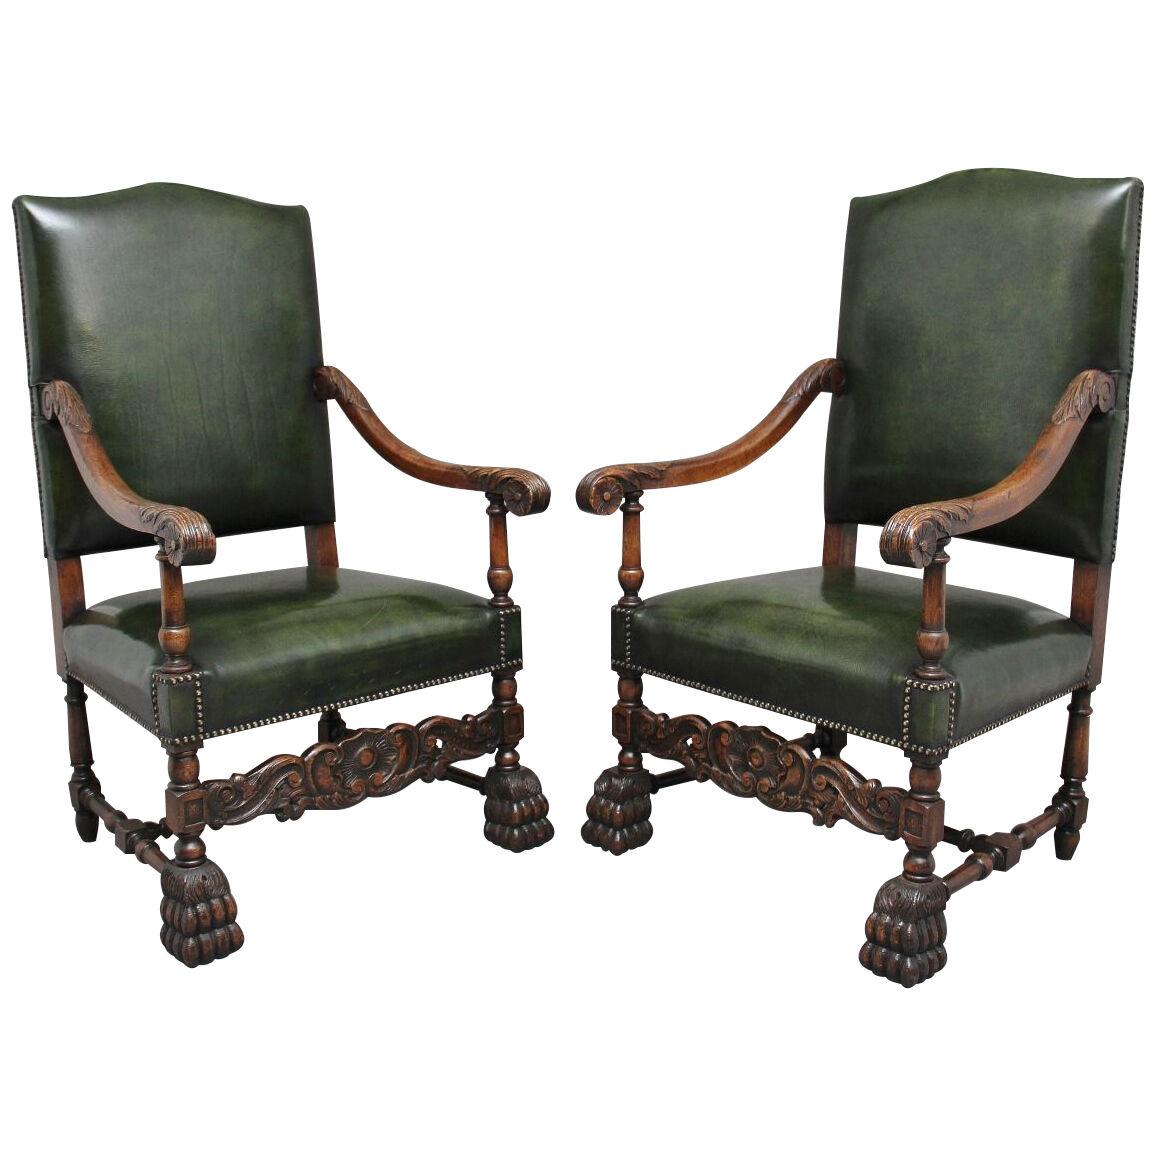 Pair of Early 20th Century Carved Armchairs in the Carolean Style